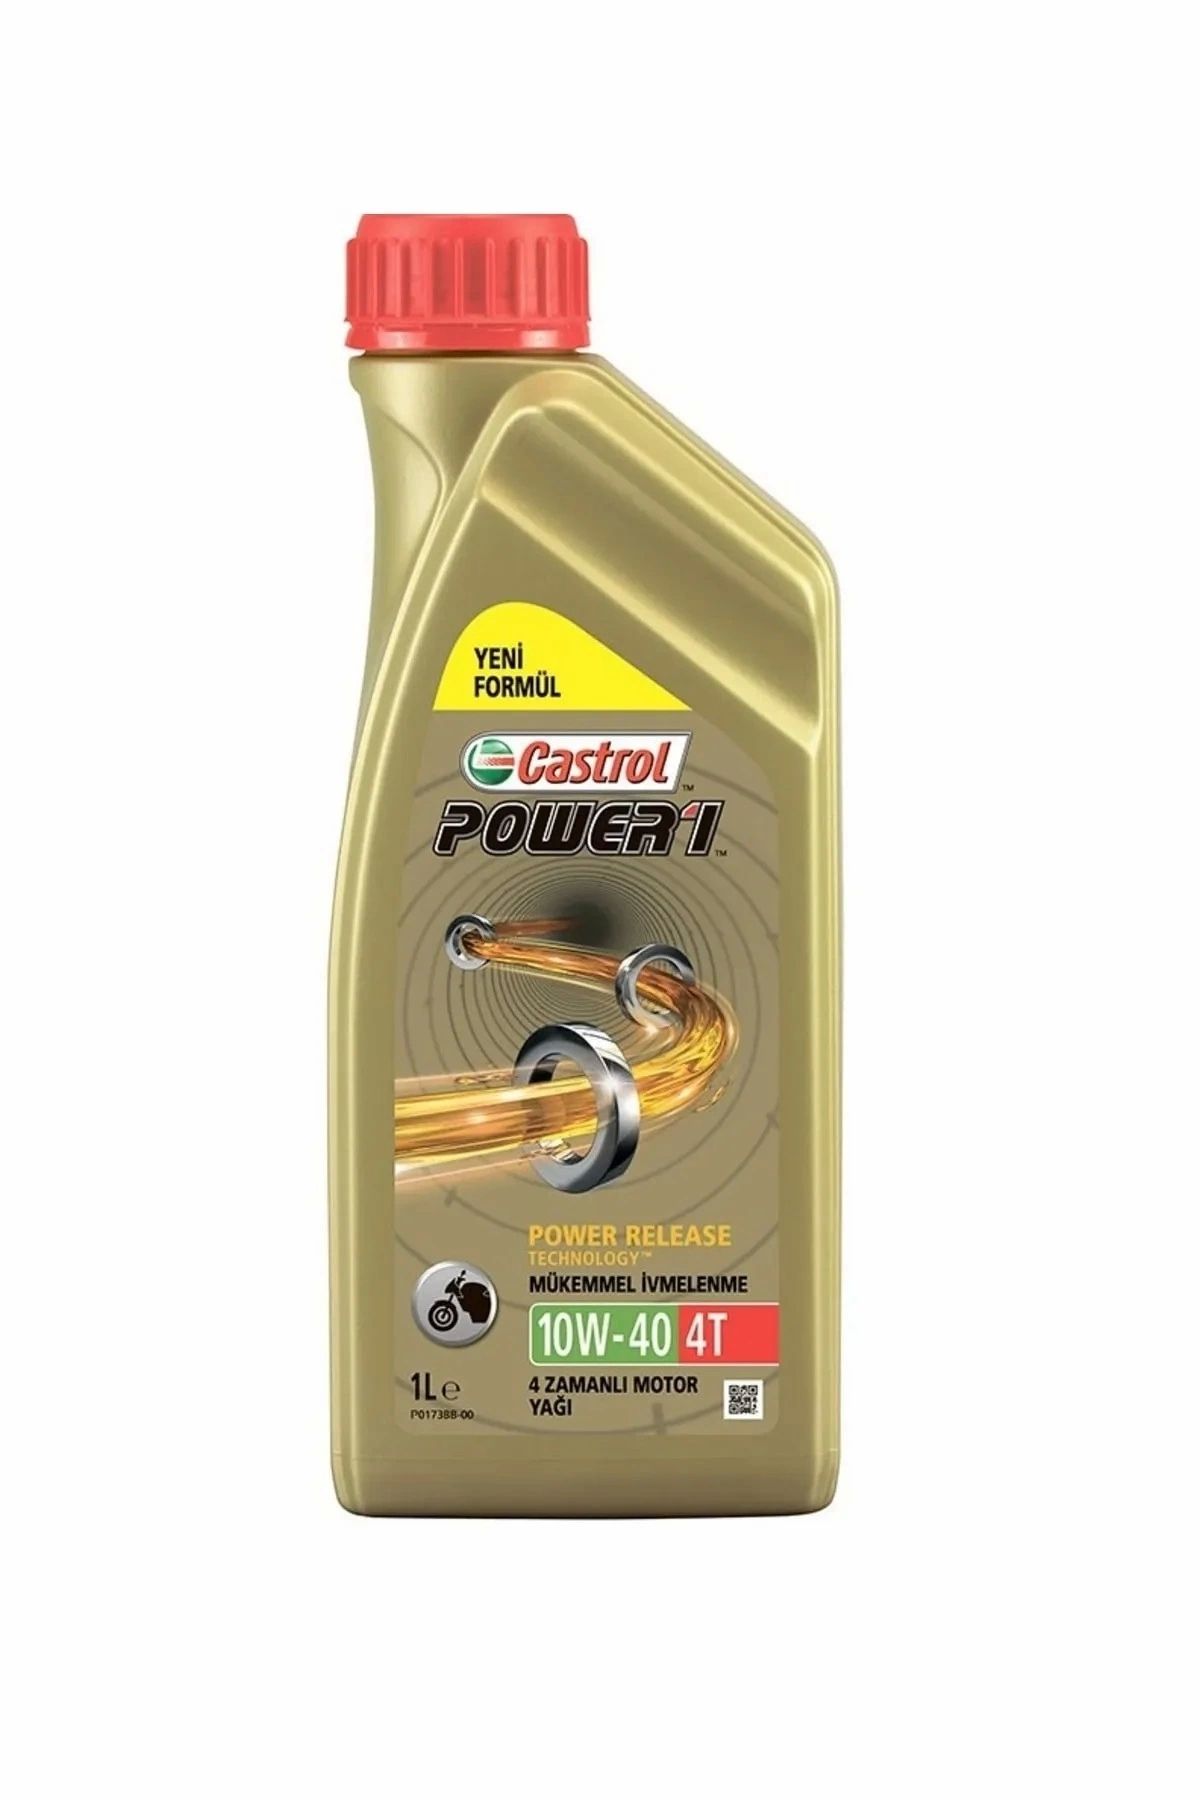 Масло 4t 10w 30. Castrol Power 1 2t. Масло кастрол 2т. 4260041011502 Castrol масло. Castrol Power 1 4t 10w-40.